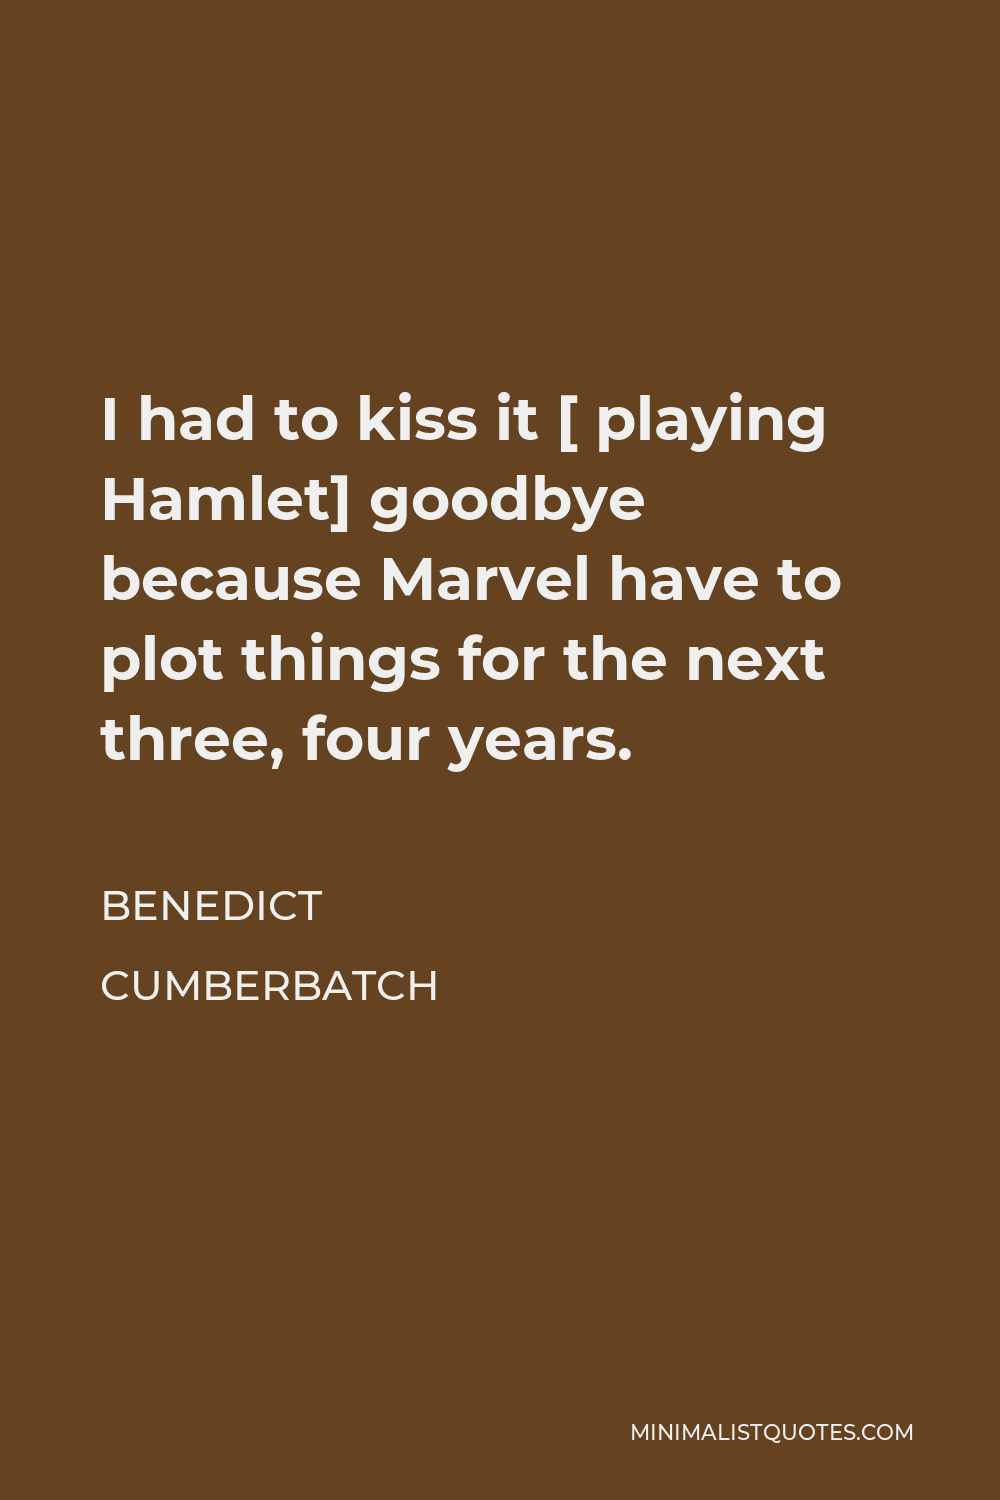 Benedict Cumberbatch Quote - I had to kiss it [ playing Hamlet] goodbye because Marvel have to plot things for the next three, four years.